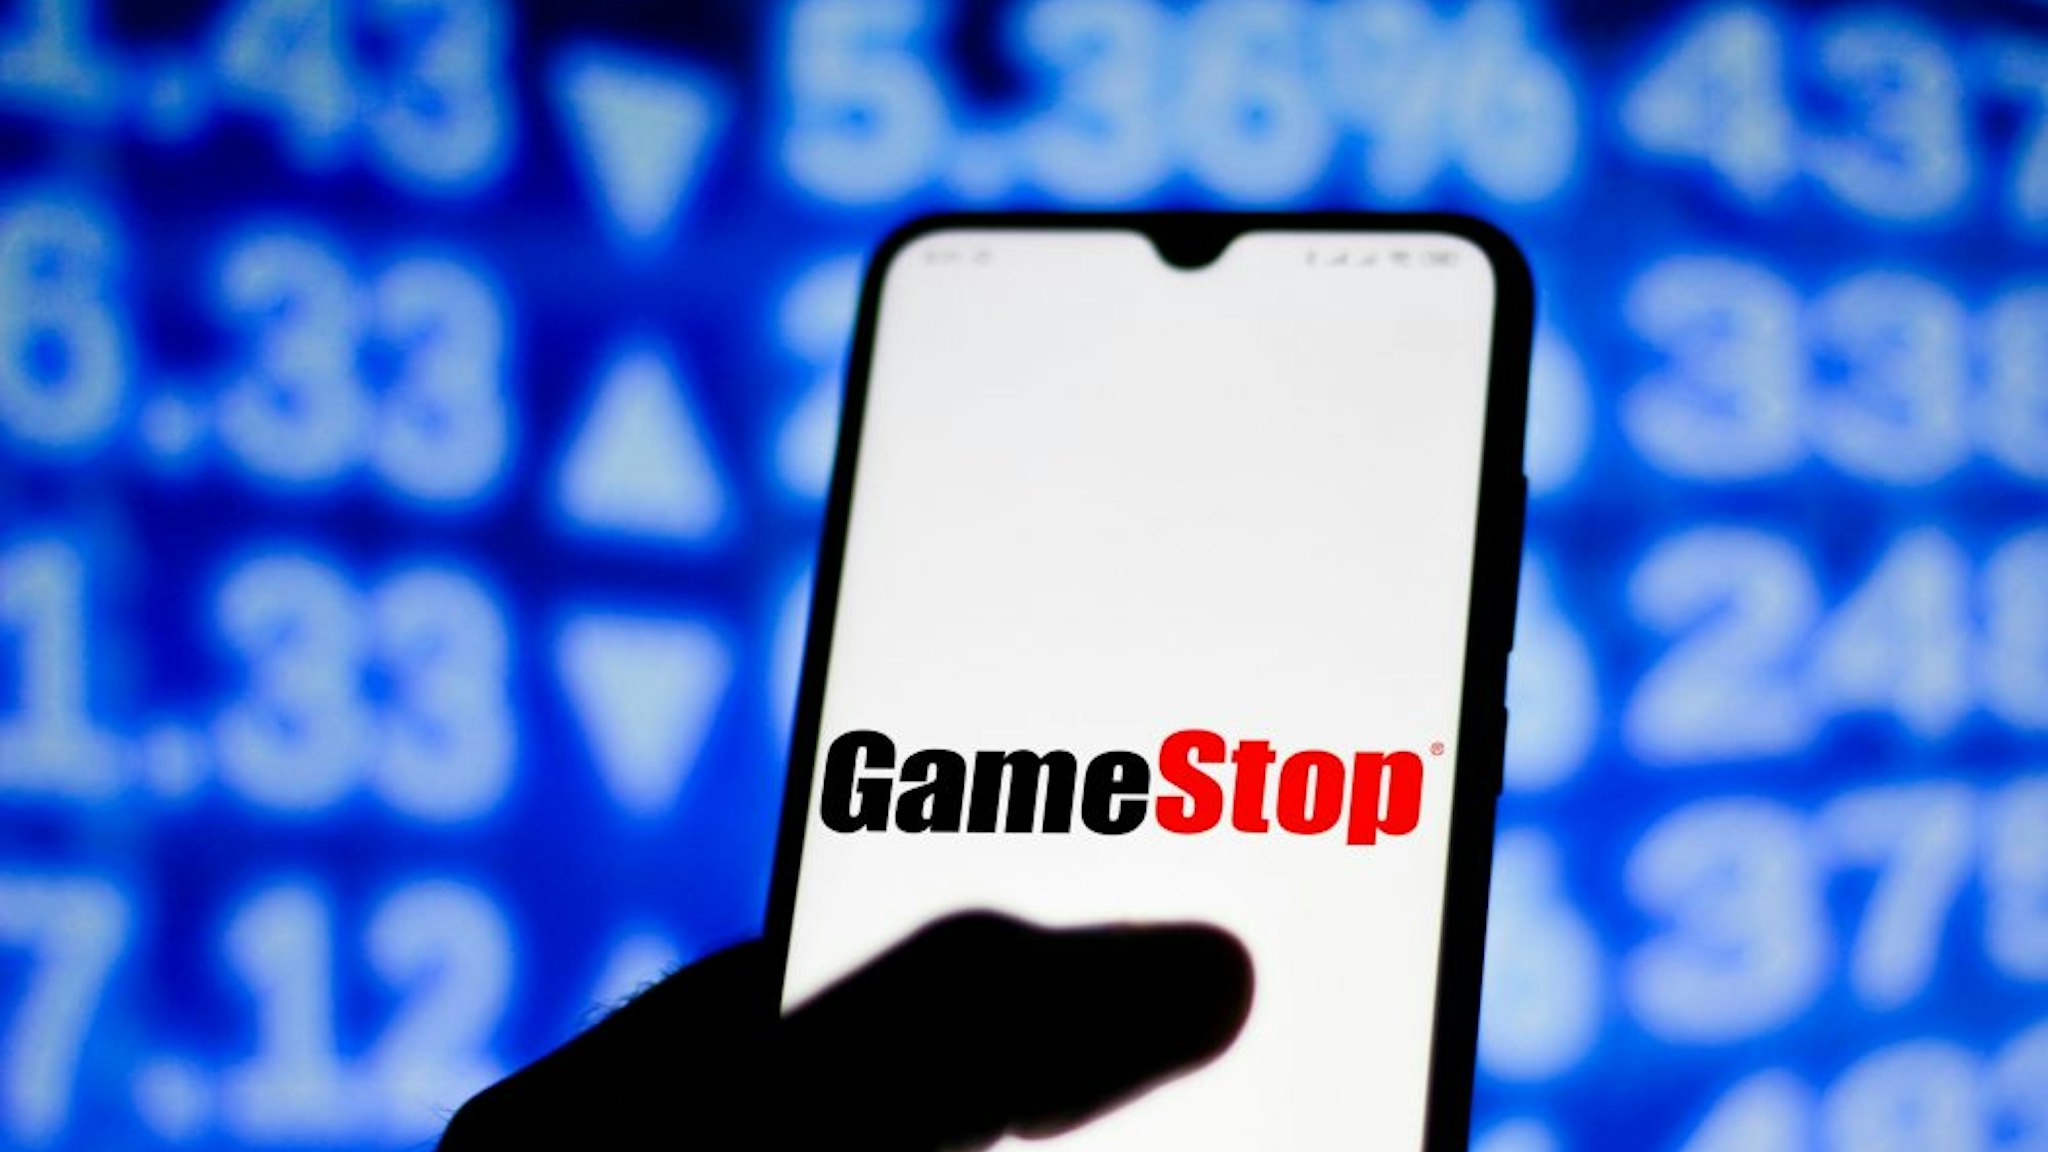 BRAZIL - 2021/02/01: In this photo illustration the GameStop logo seen displayed on a smartphone screen.